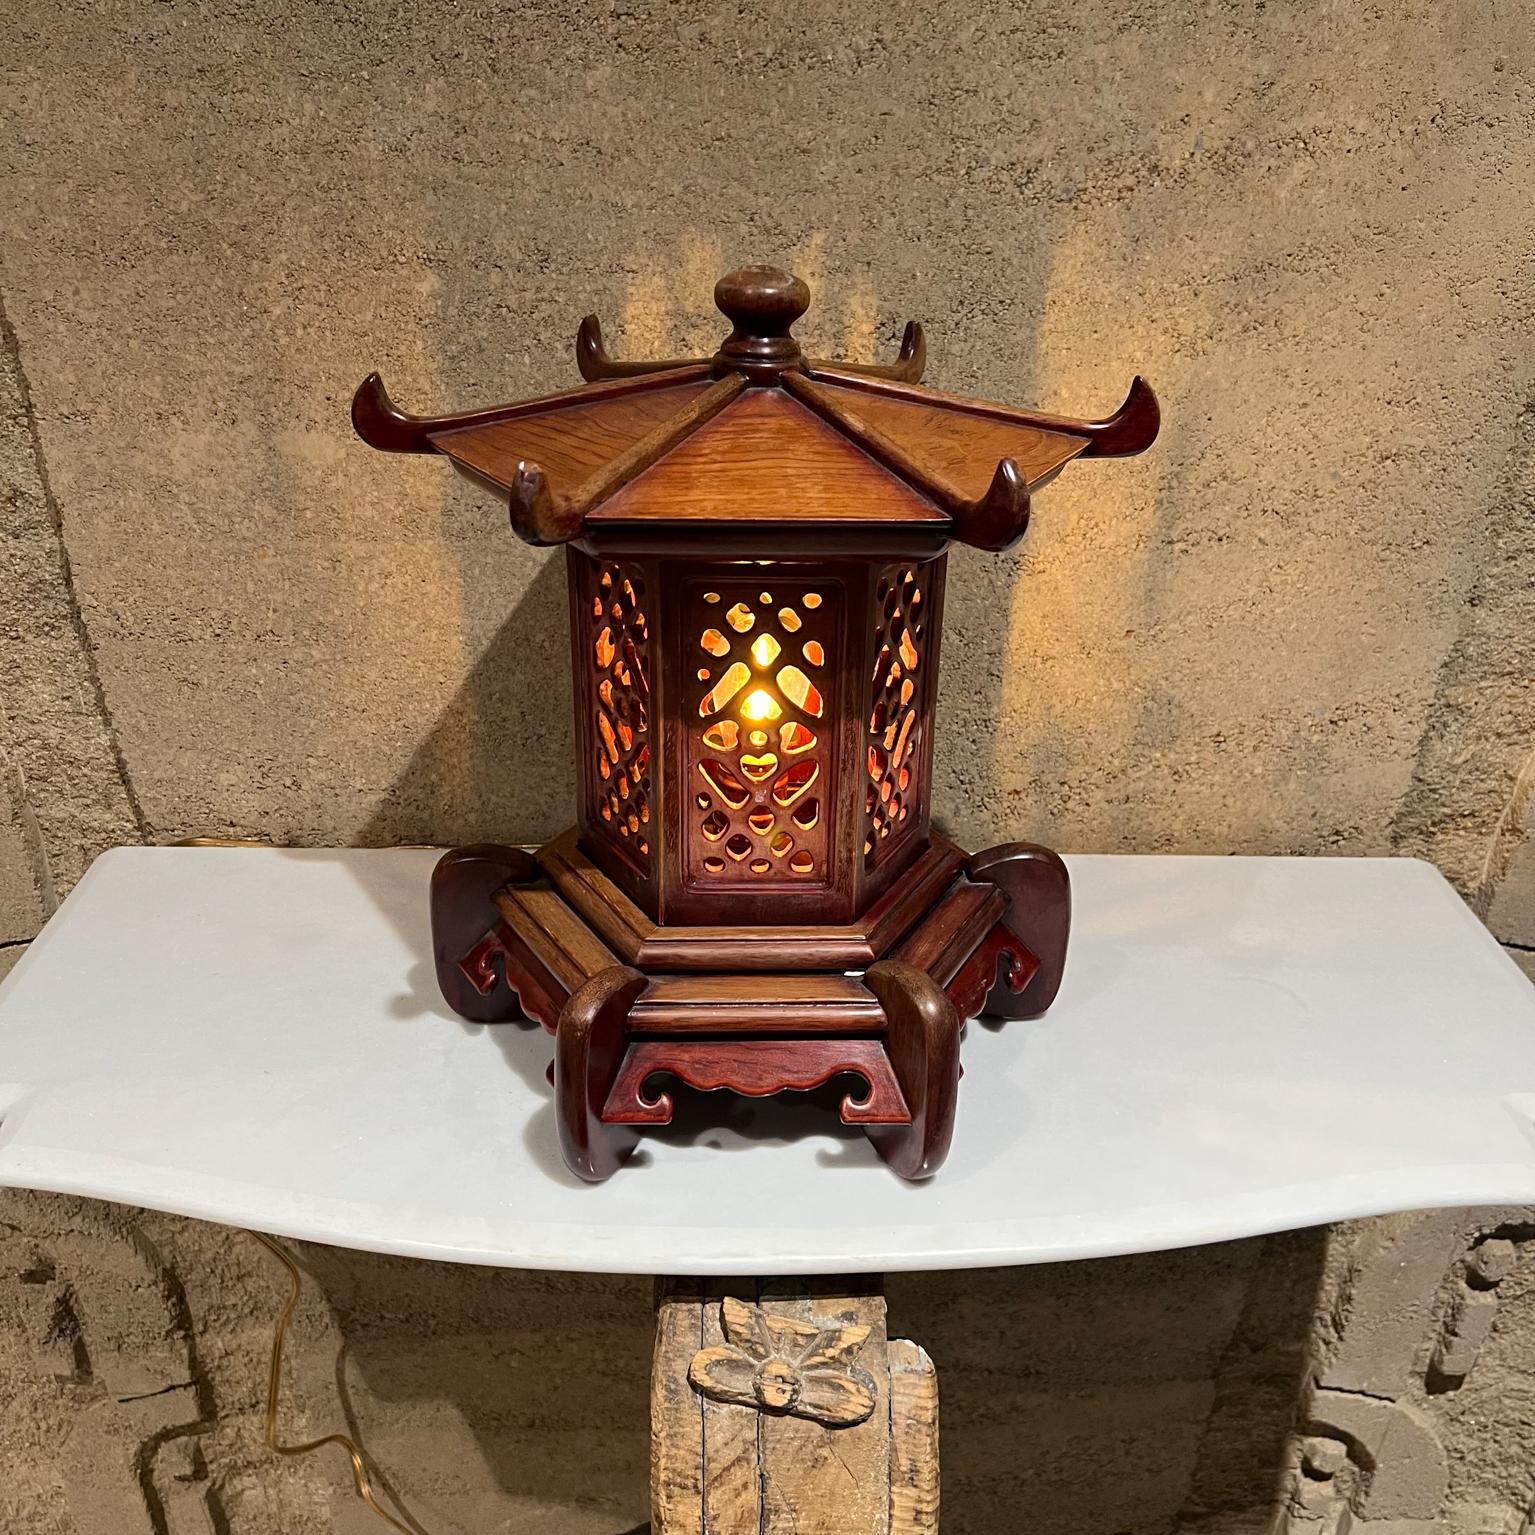 1950s Stunning Vintage Pagoda table lamp Intricate Handcrafted wood 
14.5 tall x 13.5 diameter
Preowned unrestored original vintage condition.
See images provided please.